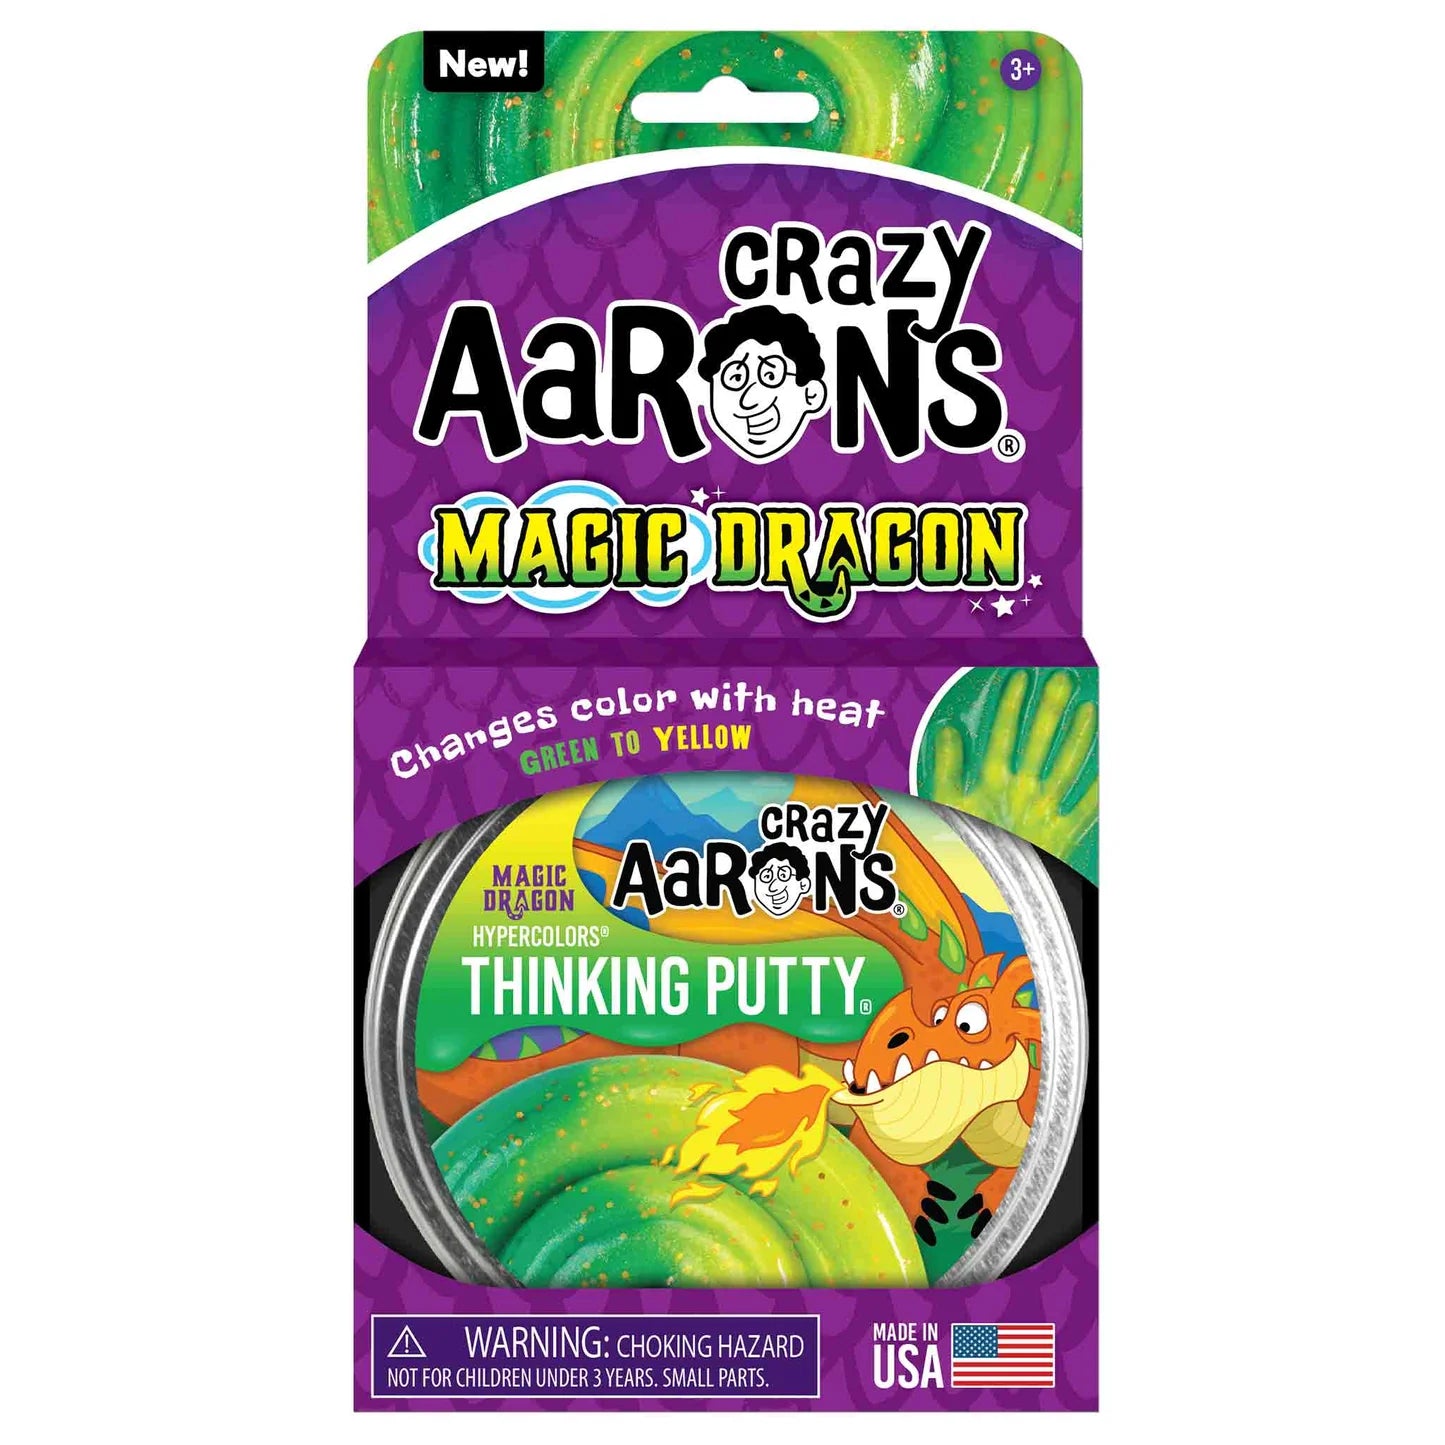 Crazy Aaron's Thinking Putty / Hypercolors - Magic Dragon